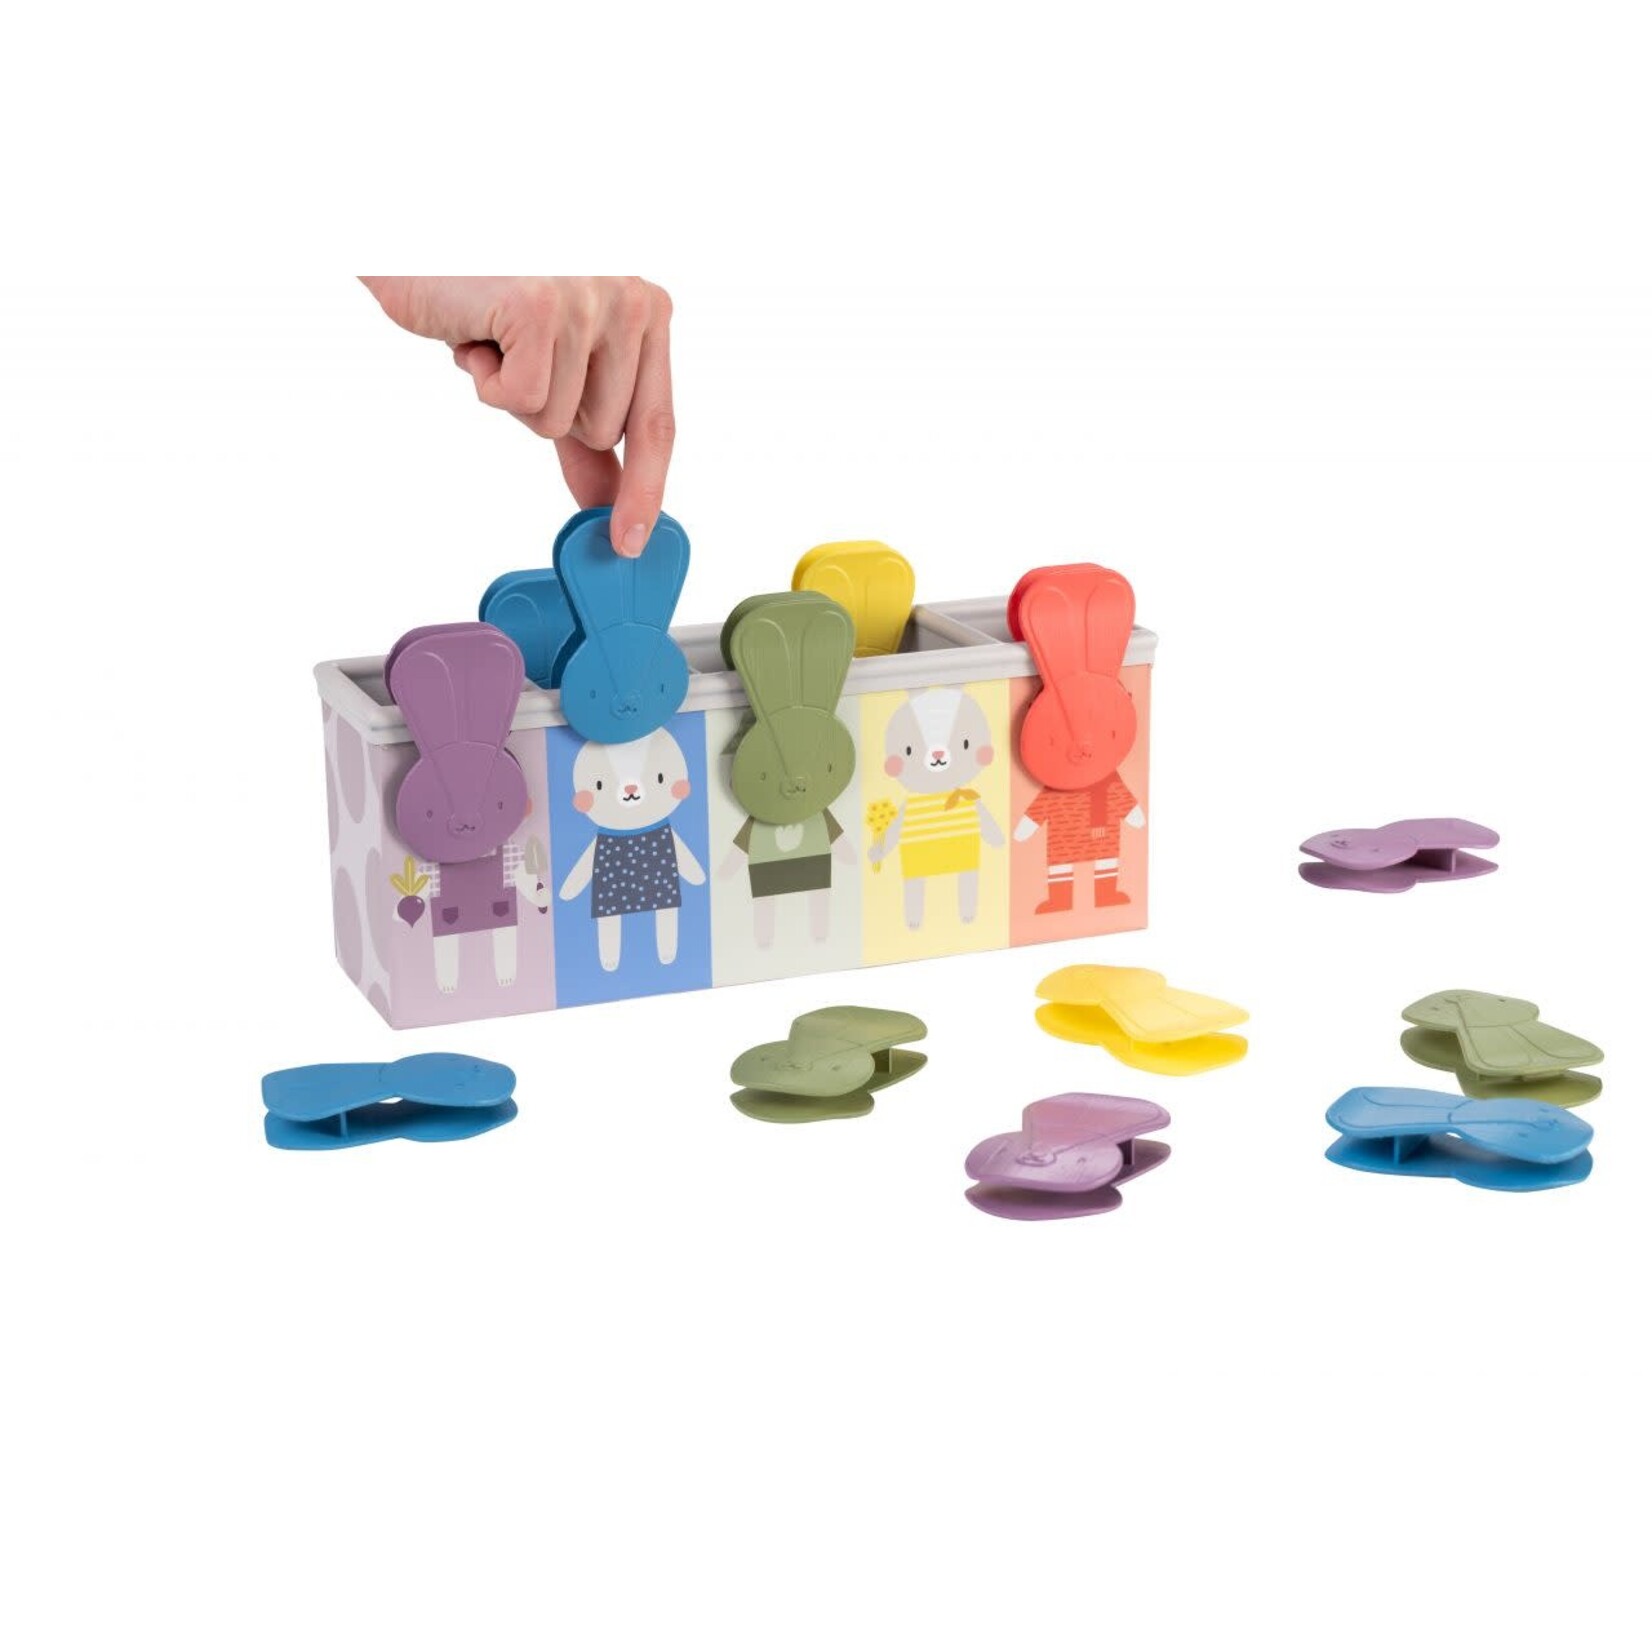 Taf toys Count & Match Bunny Toy